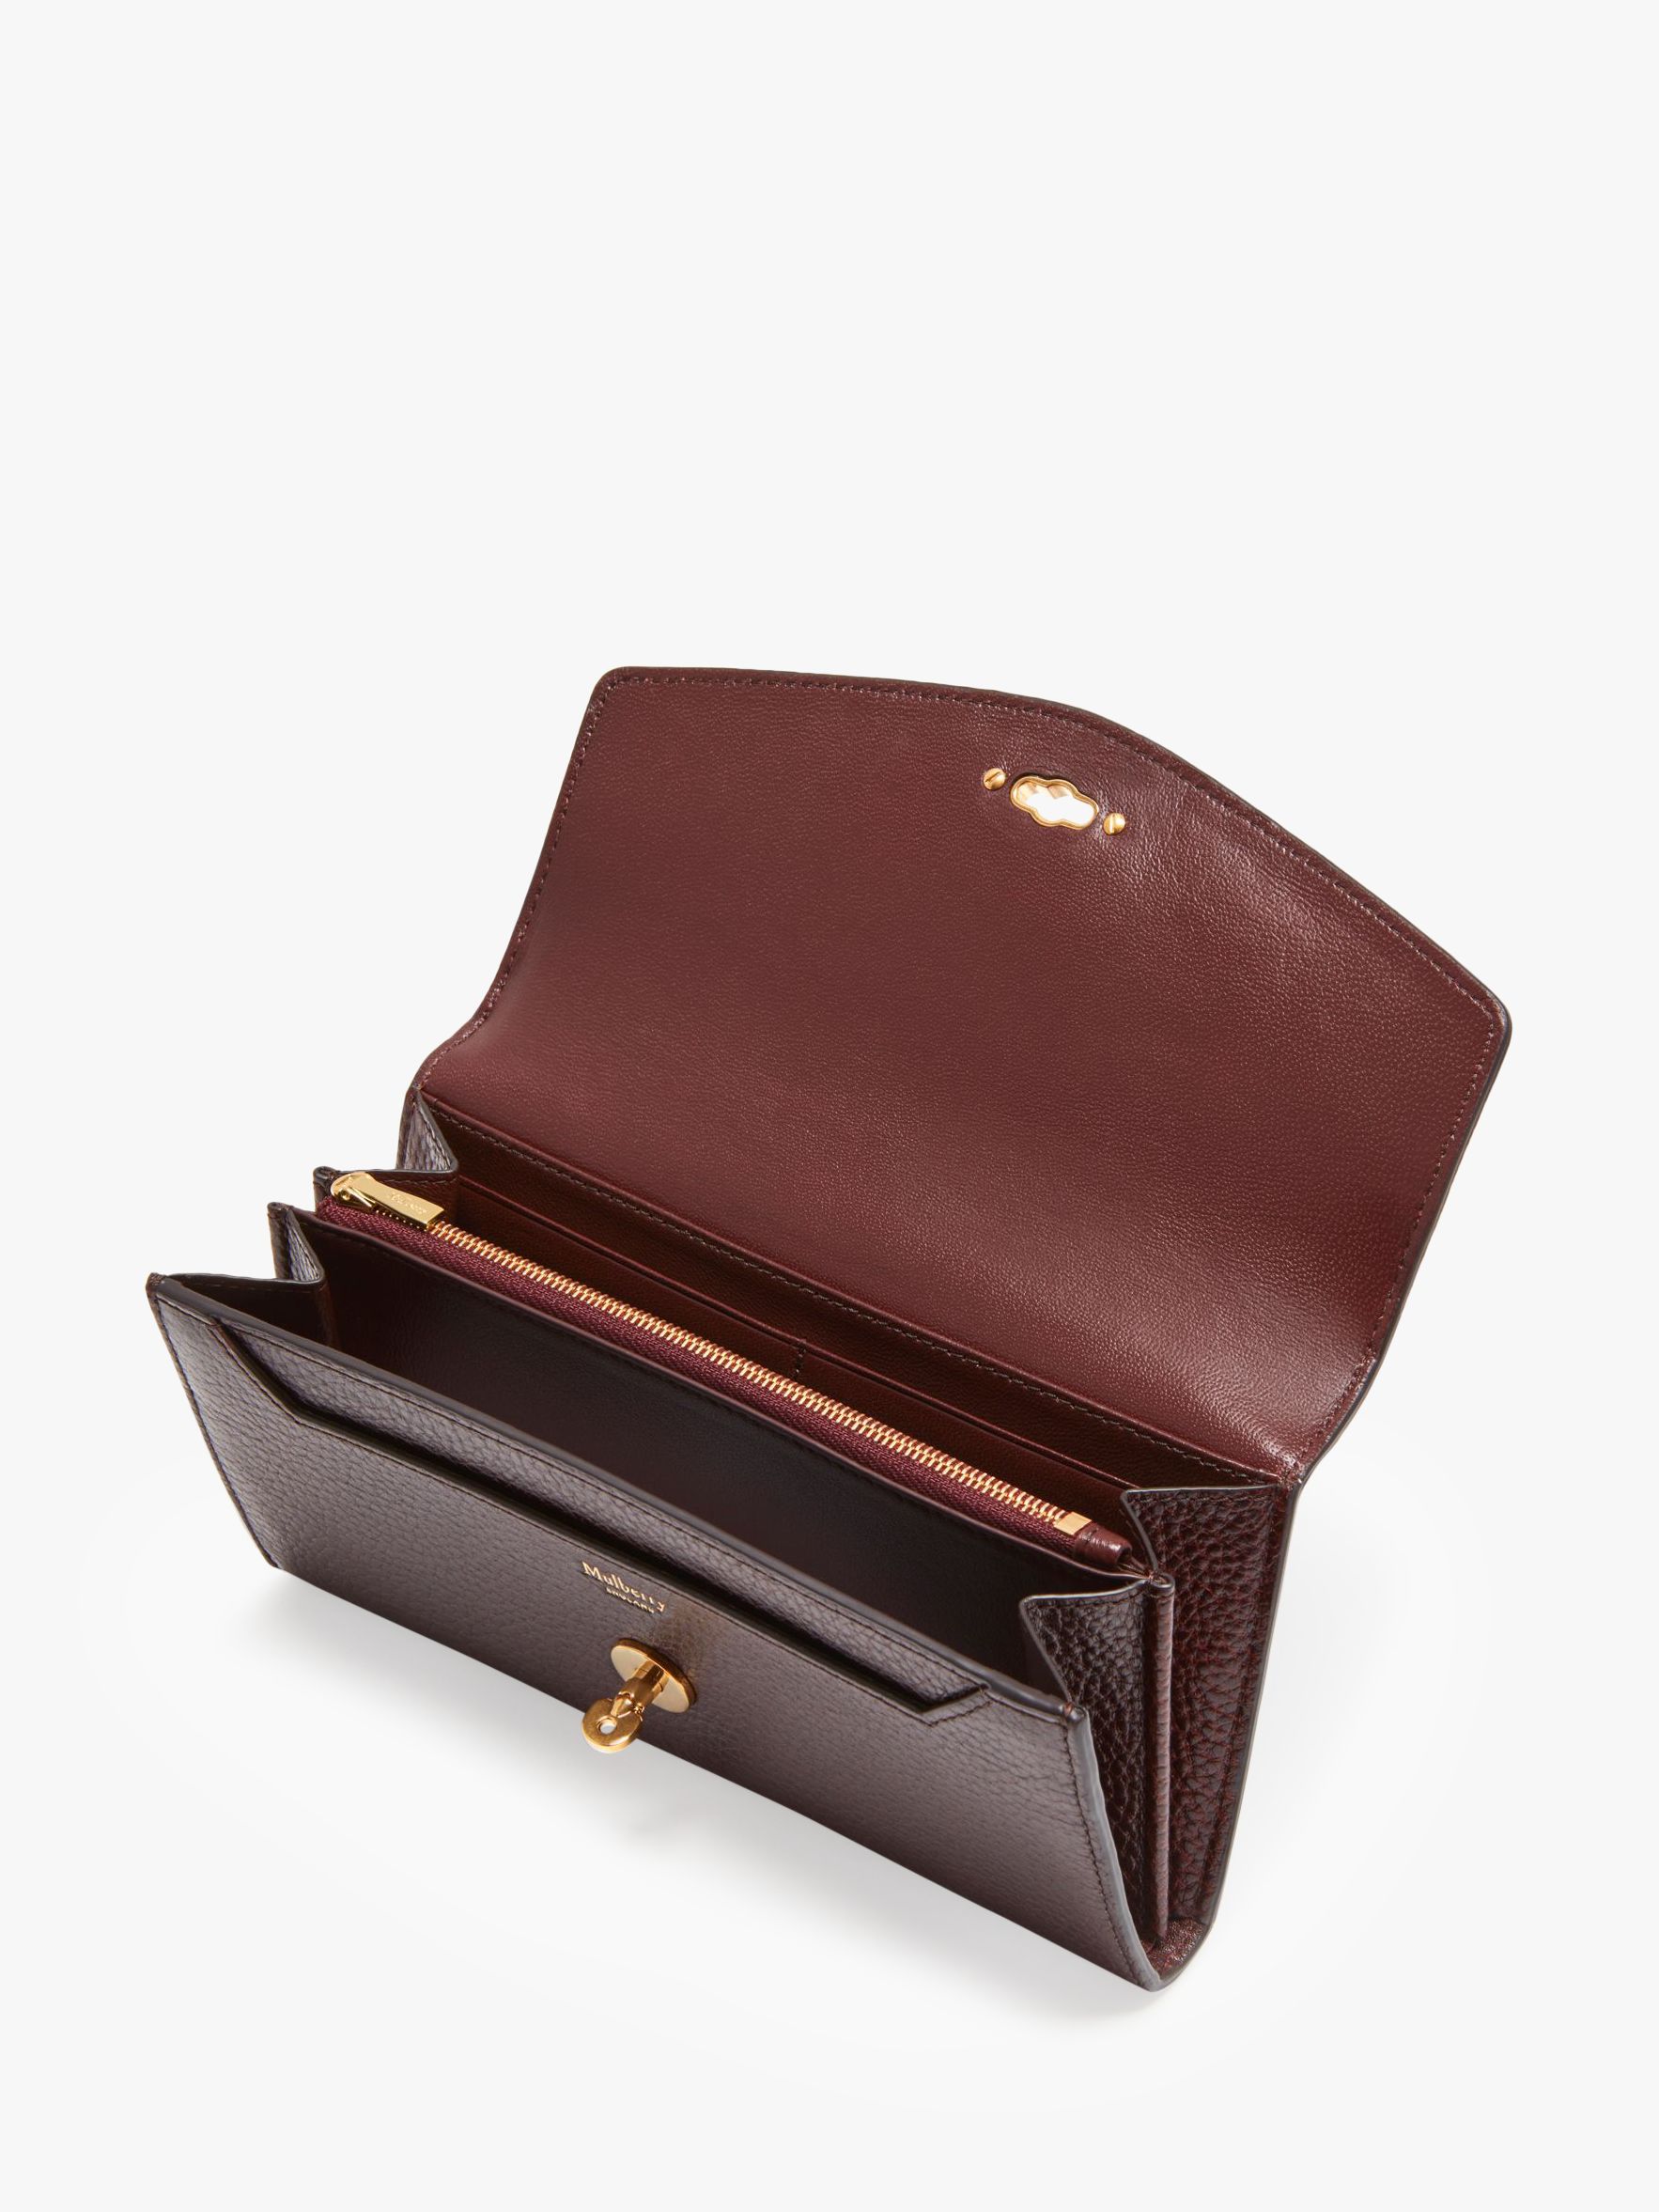 Mulberry Darley Grain Veg Tanned Leather Wallet, Oxblood at John Lewis ...